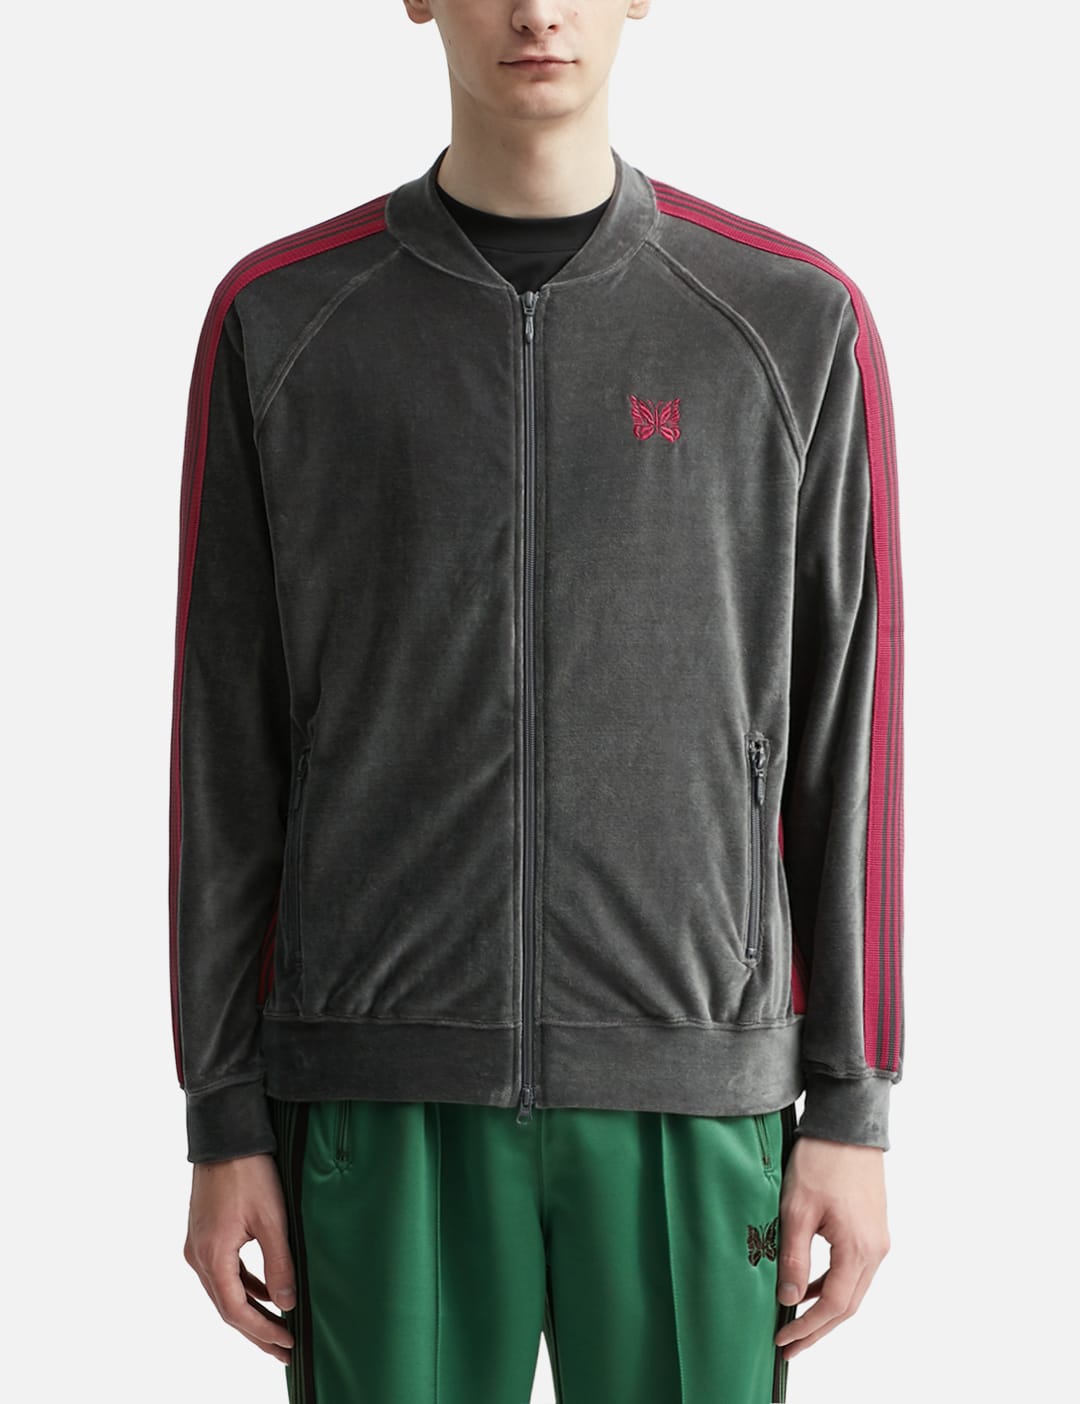 Needles - R.C. TRACK JACKET | HBX - Globally Curated Fashion and